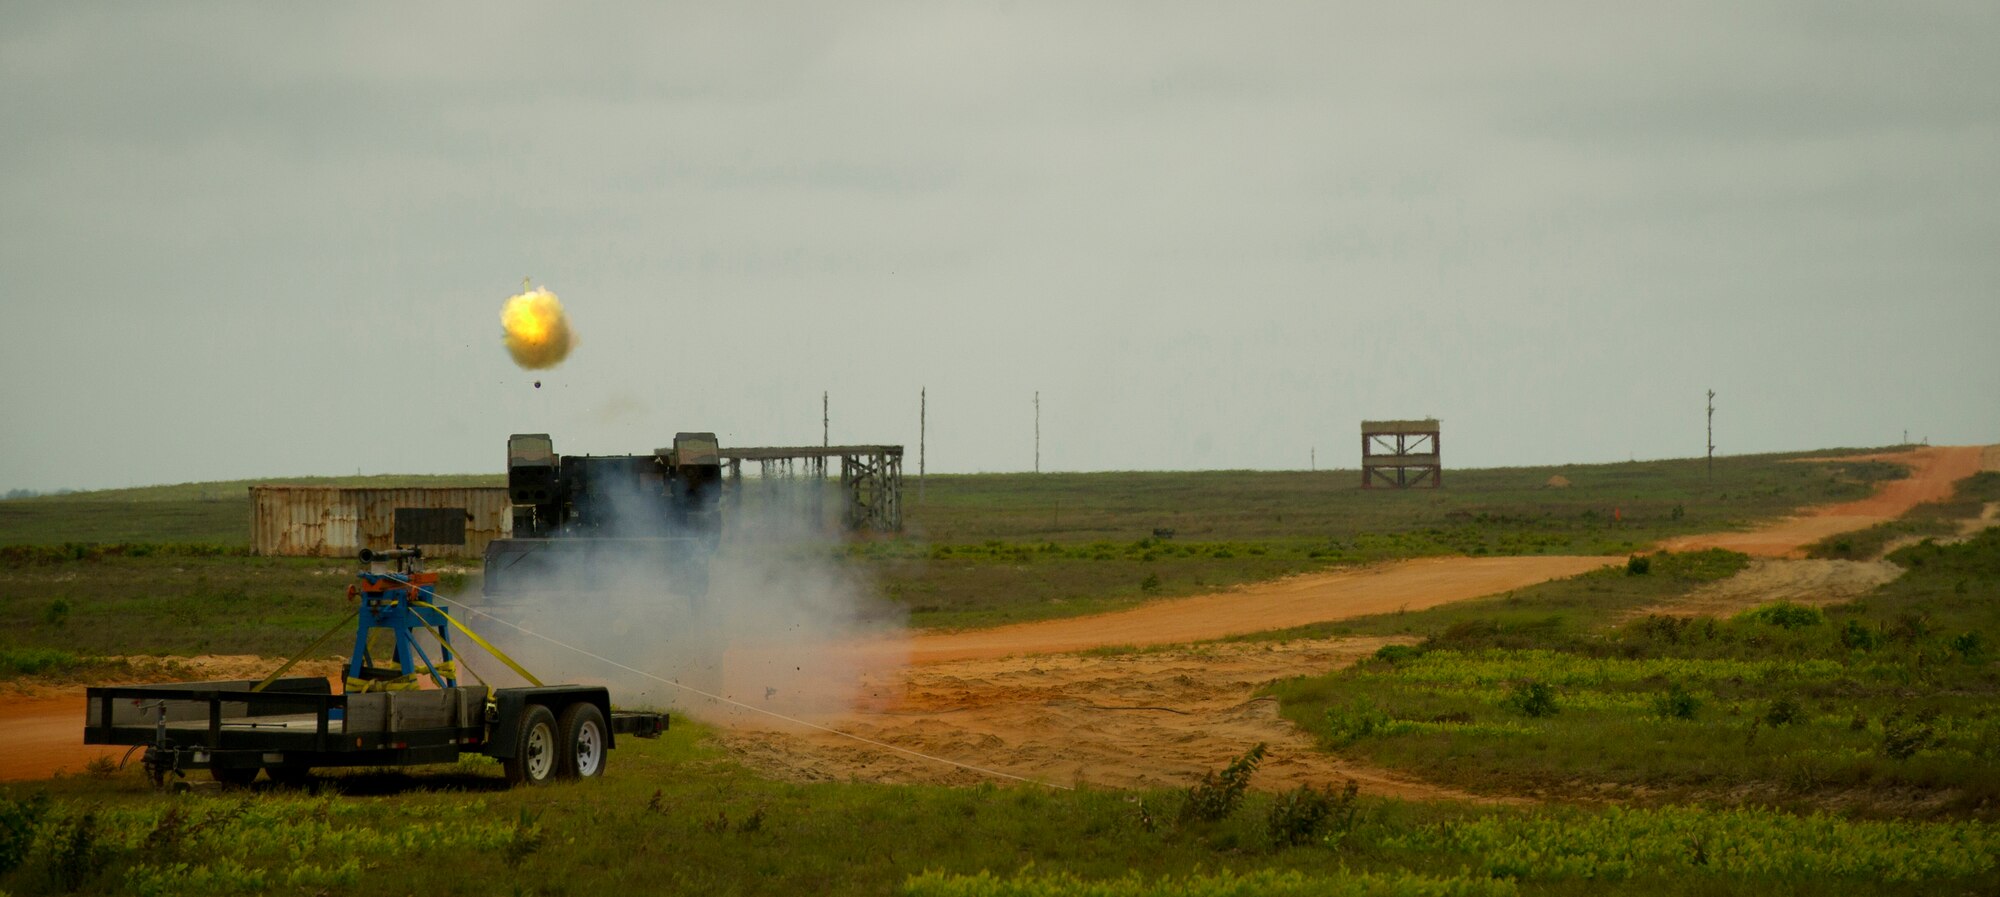 A stinger missile takes flight from a HUMVEE April 26, 2011 at a range on Eglin Air Force Base, Florida.  The stinger was launched during a demonstration showcasing the damage it can do. The target was a UH1 Huey helicopter.(U.S. Air Force photo by Senior Airman David Salanitri/Released)